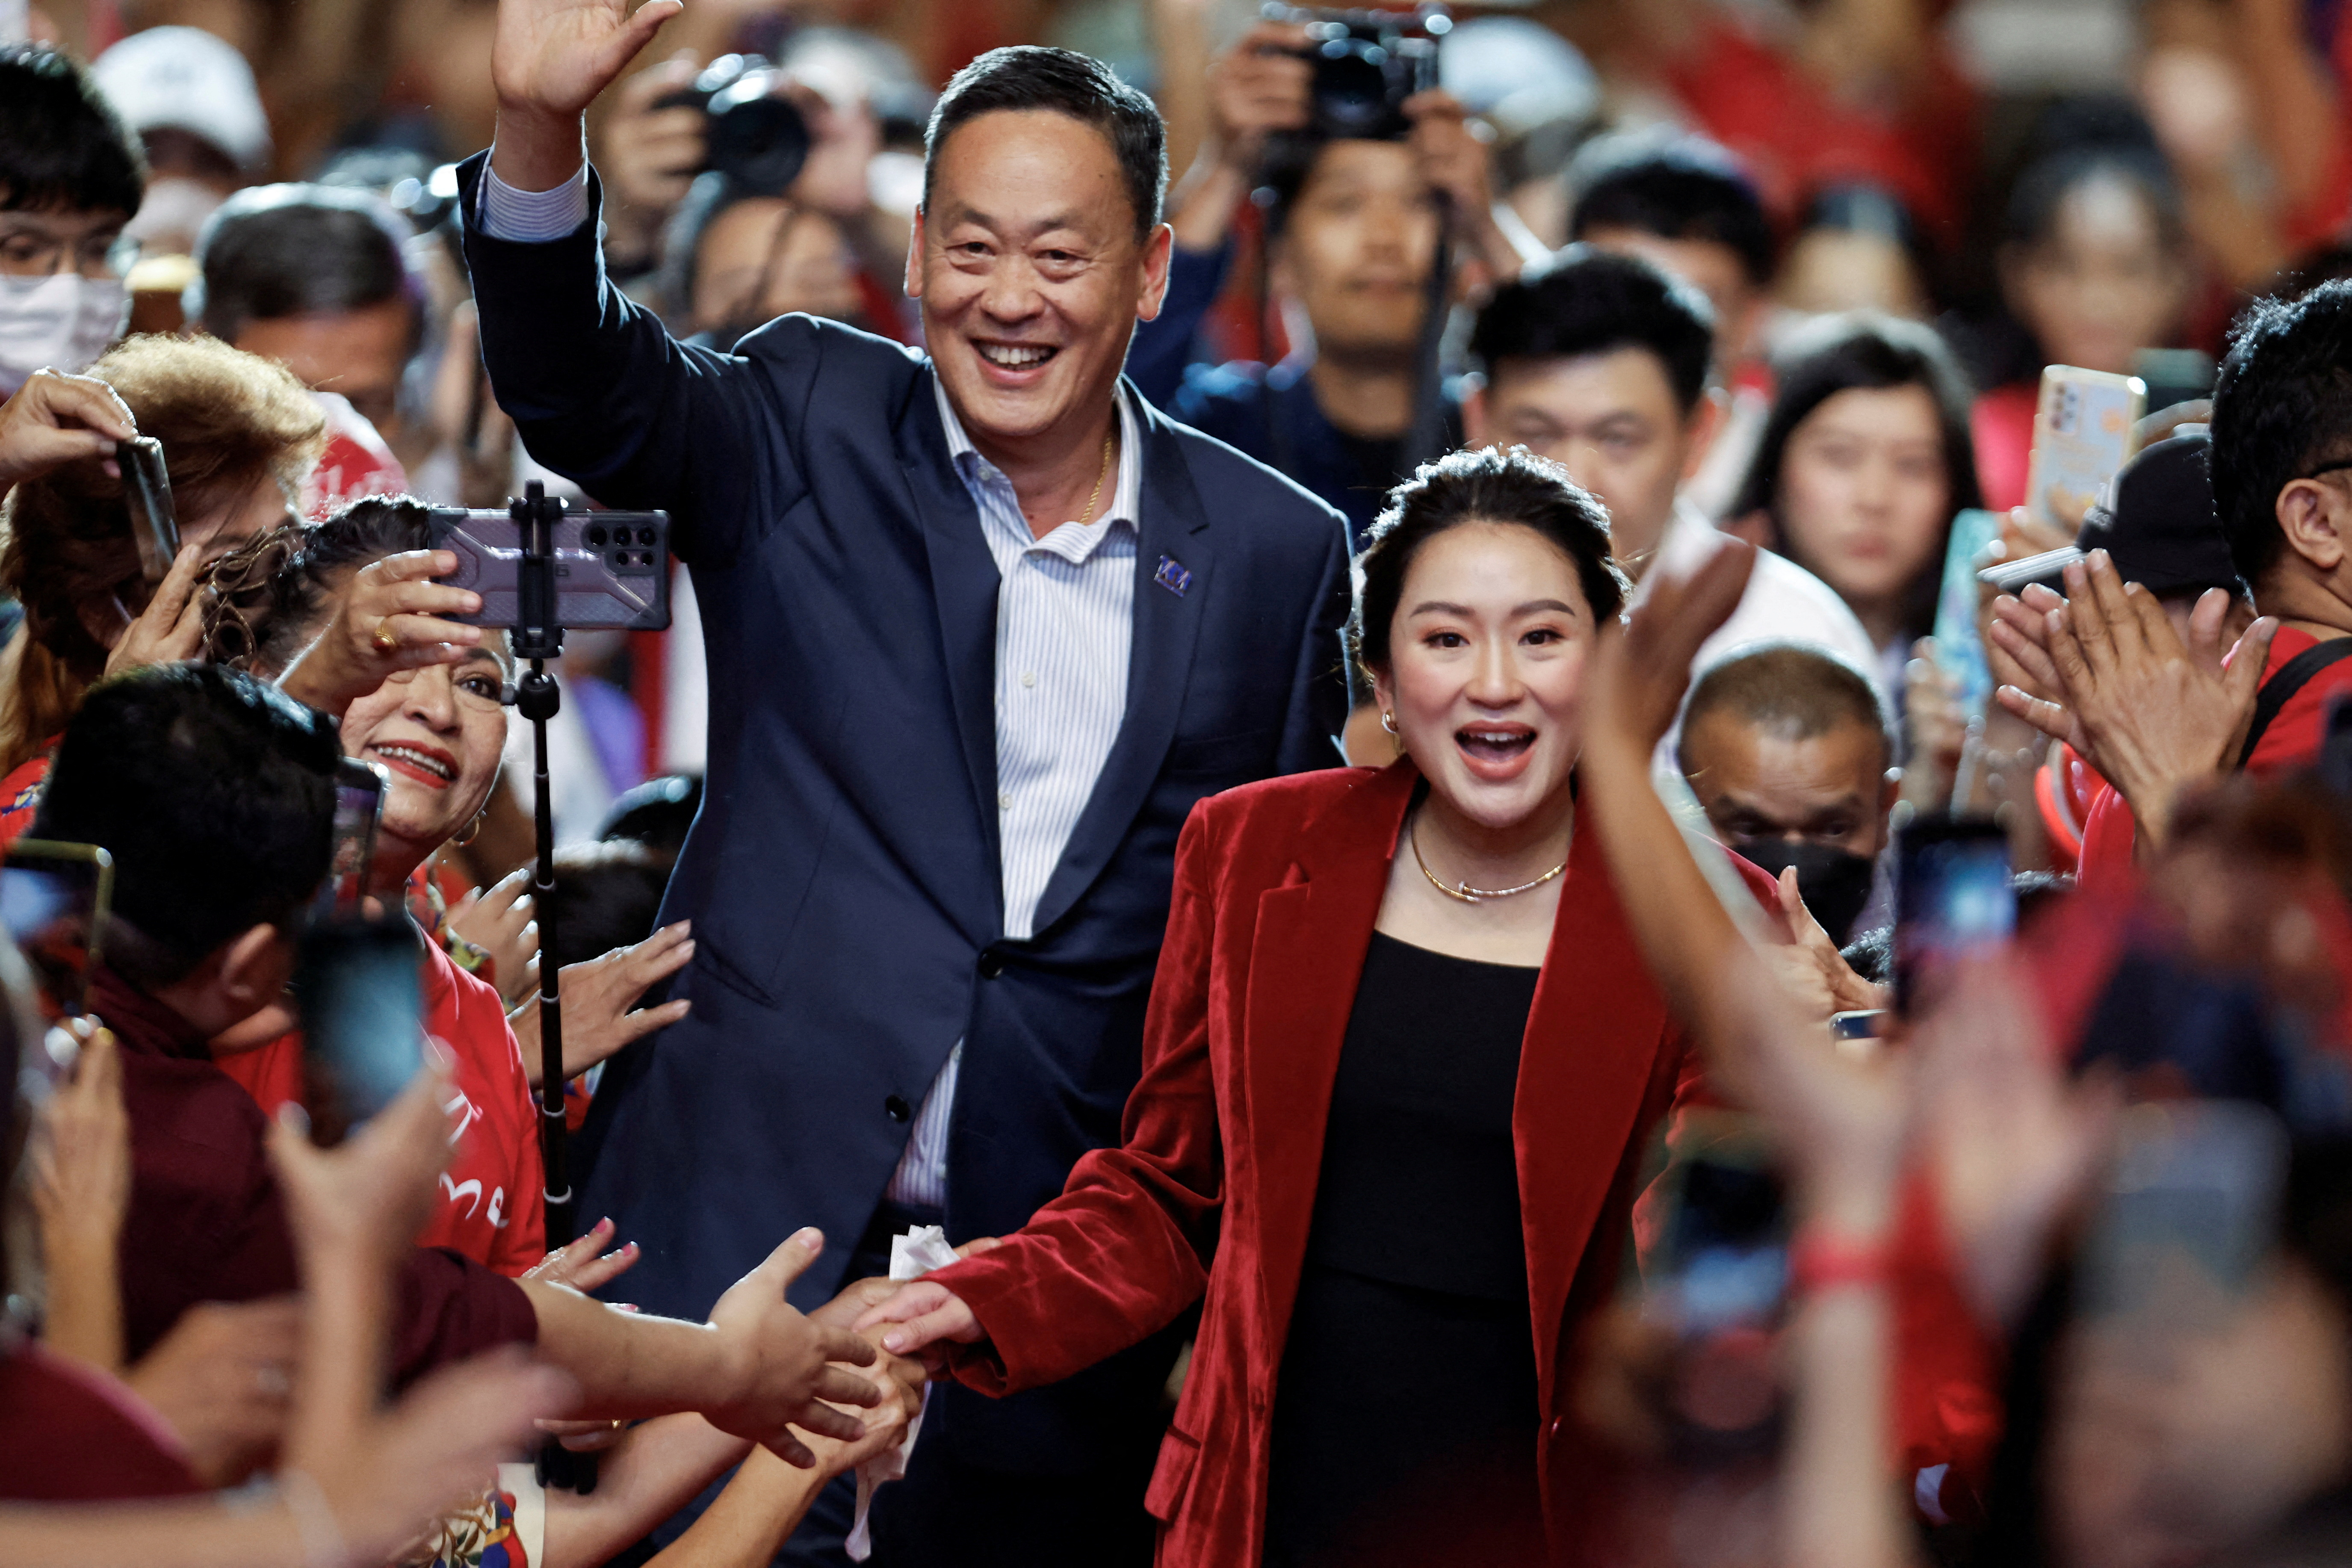 Thai prime minister candidate Paetongtarn Shinawatra and Srettha Thavisin at a rally two days before election, in Bangkok